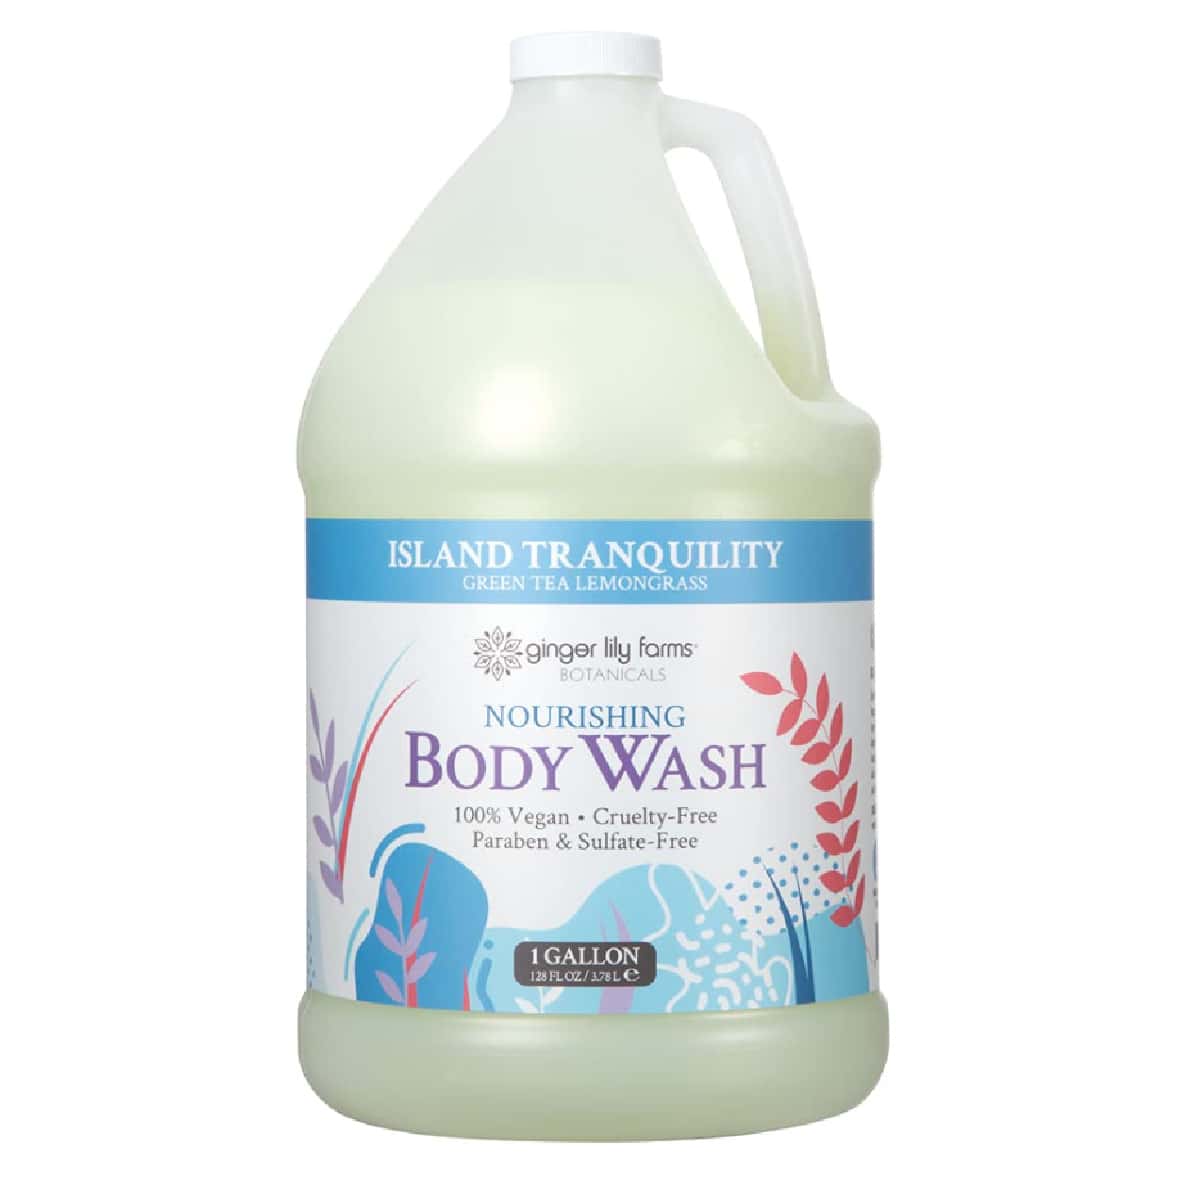 A blue and white gallon jug of Ginger Lily Farms vegan body wash against a white background. 